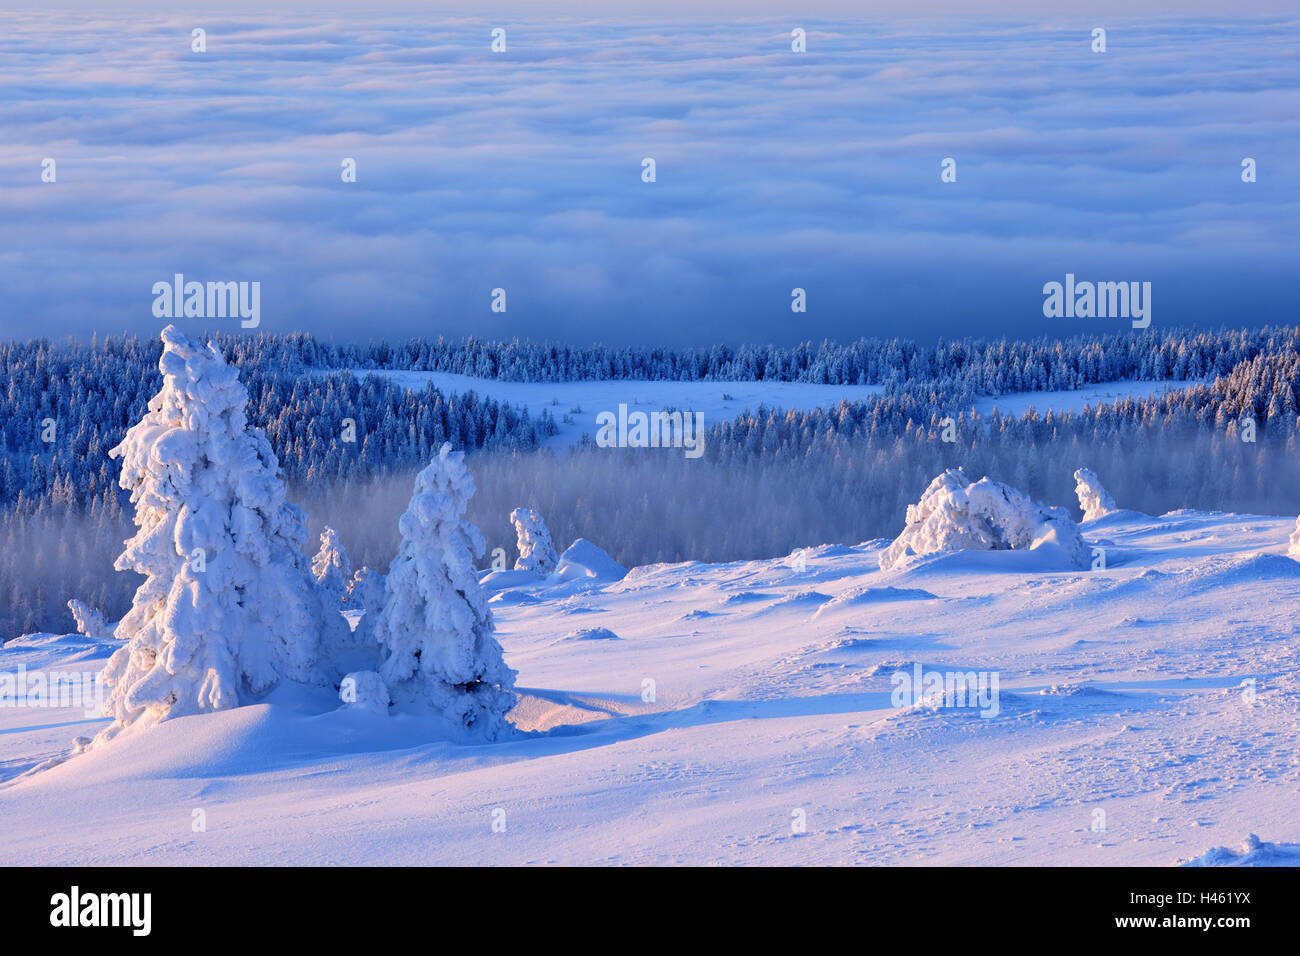 Germany, Saxony-Anhalt, national park resin, morning tuning on the lump, winter, Stock Photo